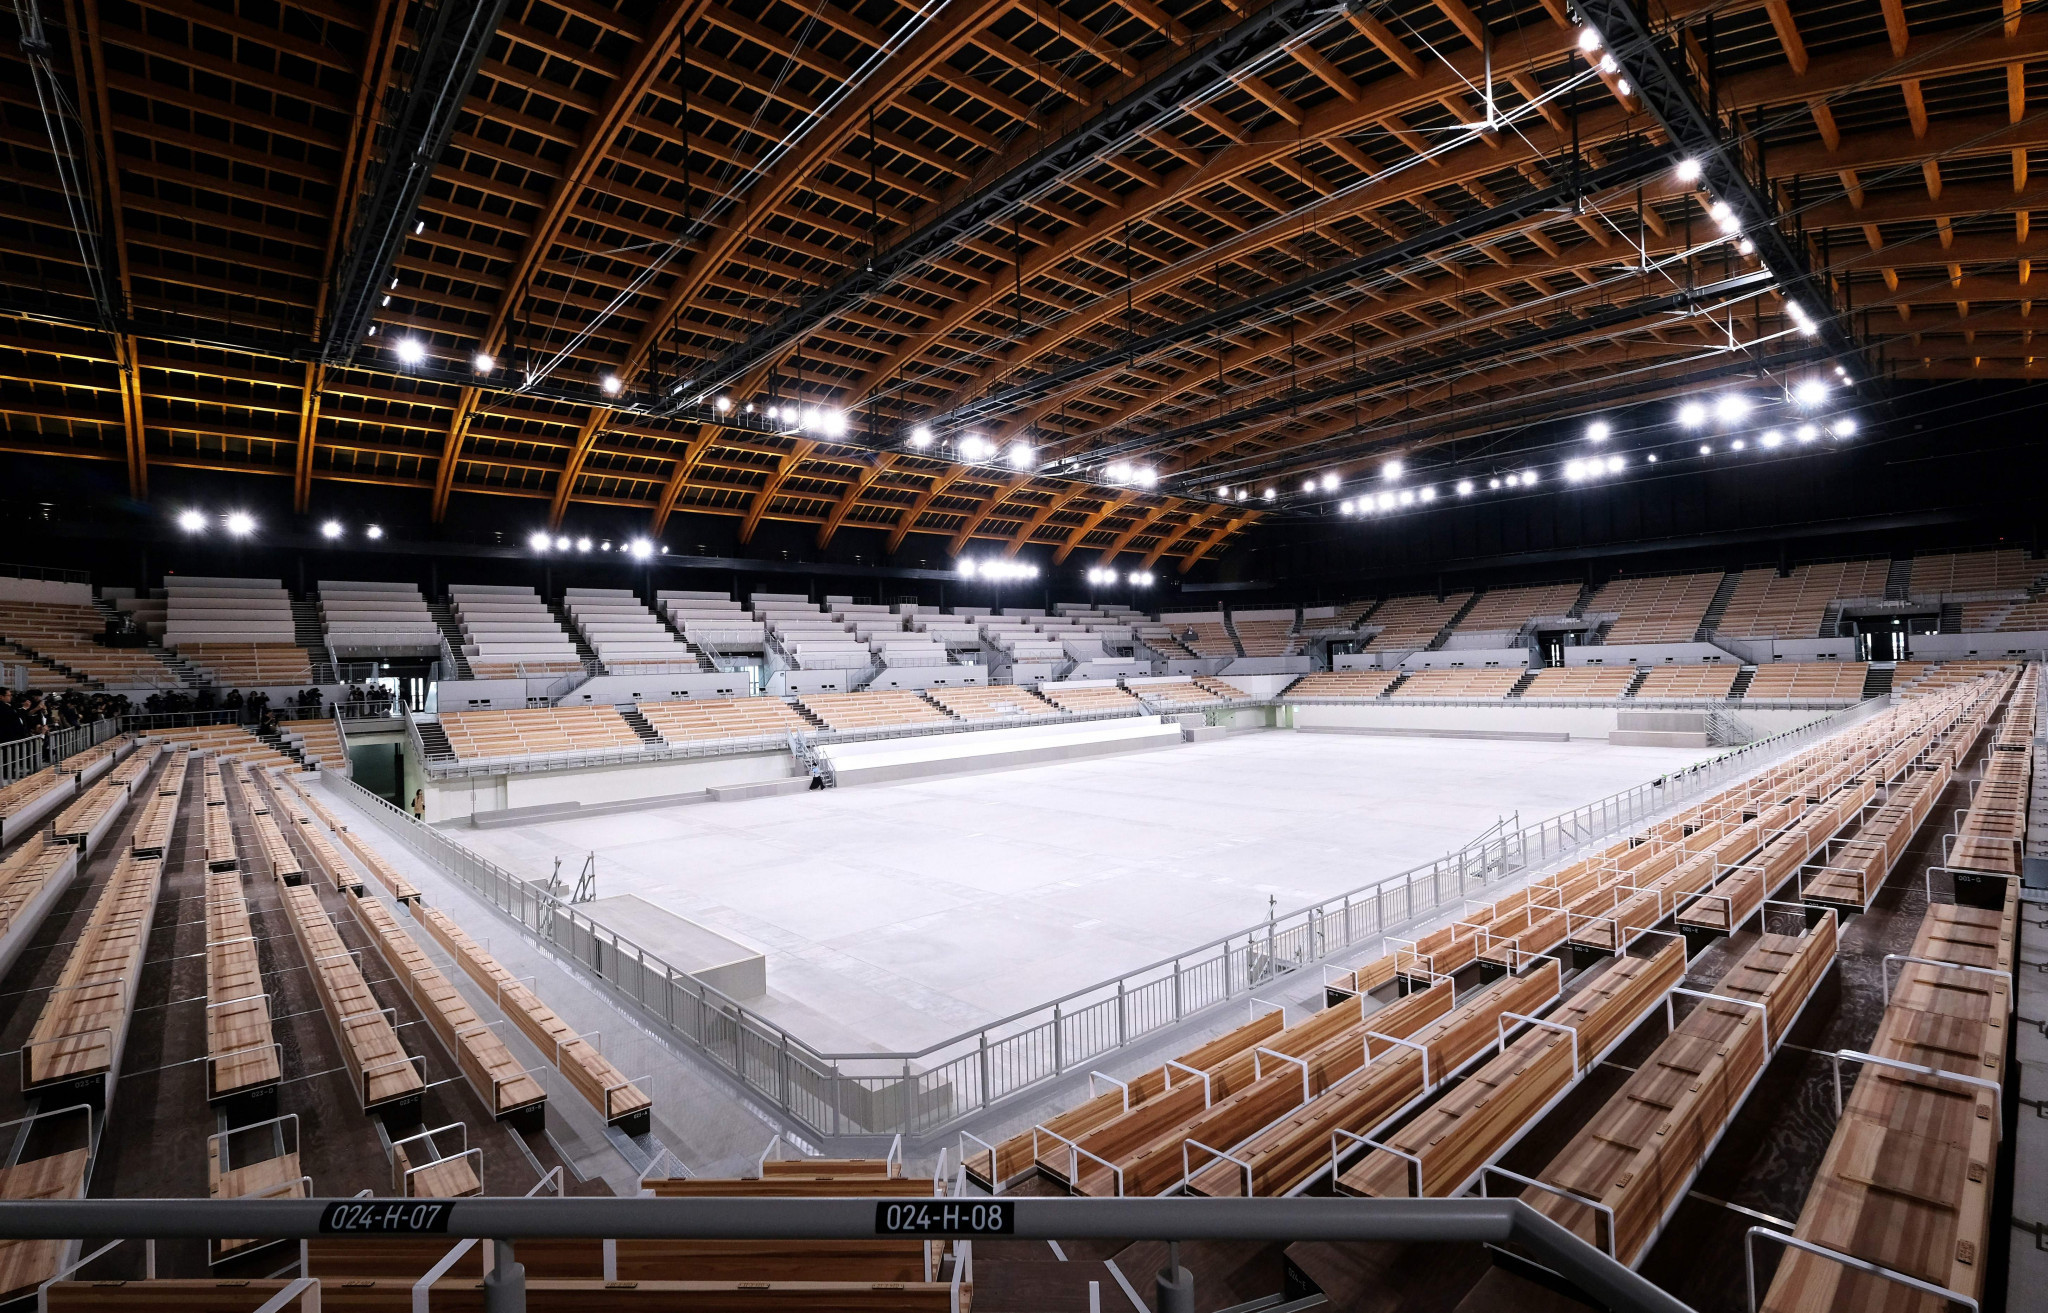 The venue features a 30 metre wide timber roof ©Getty Images